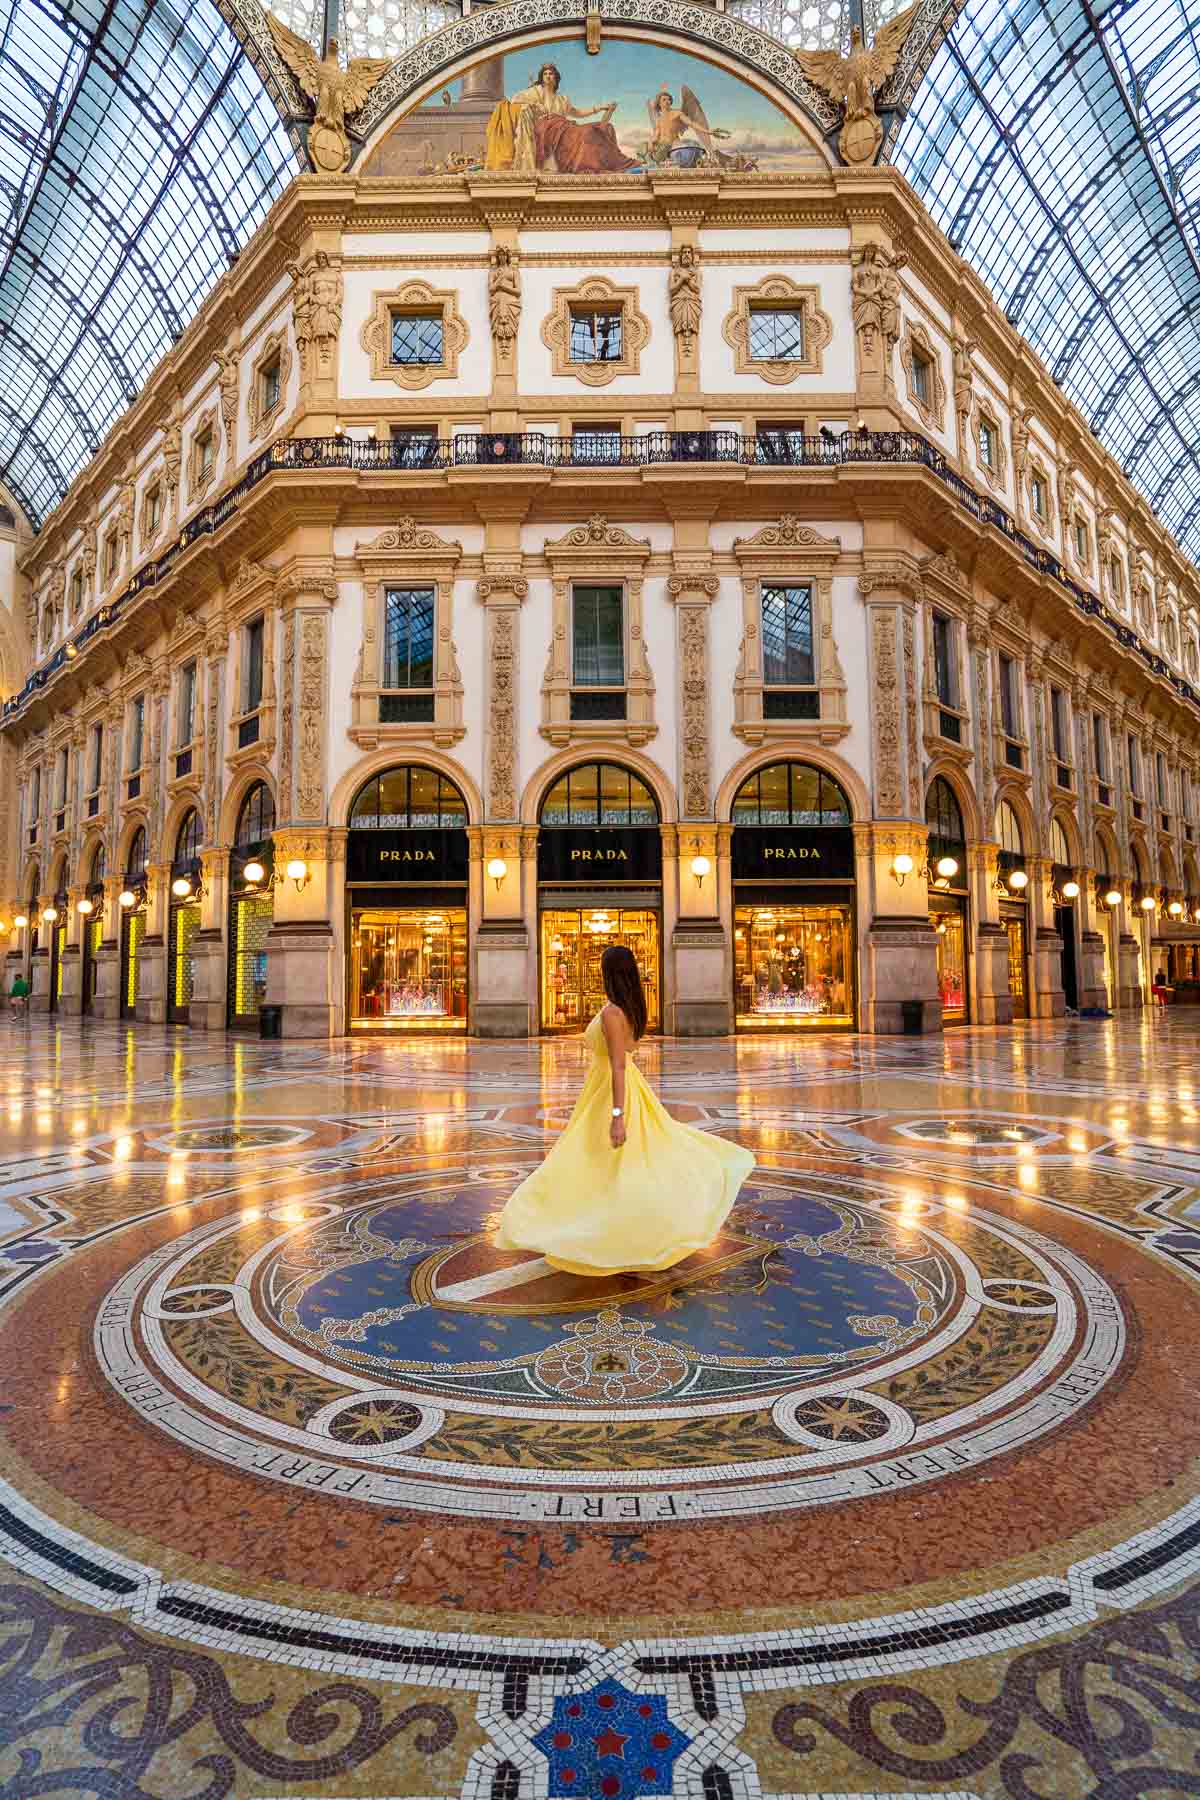 Girl in a yellow dress twirling inside the Galleria Vittorio Emanuele in Milan, Italy